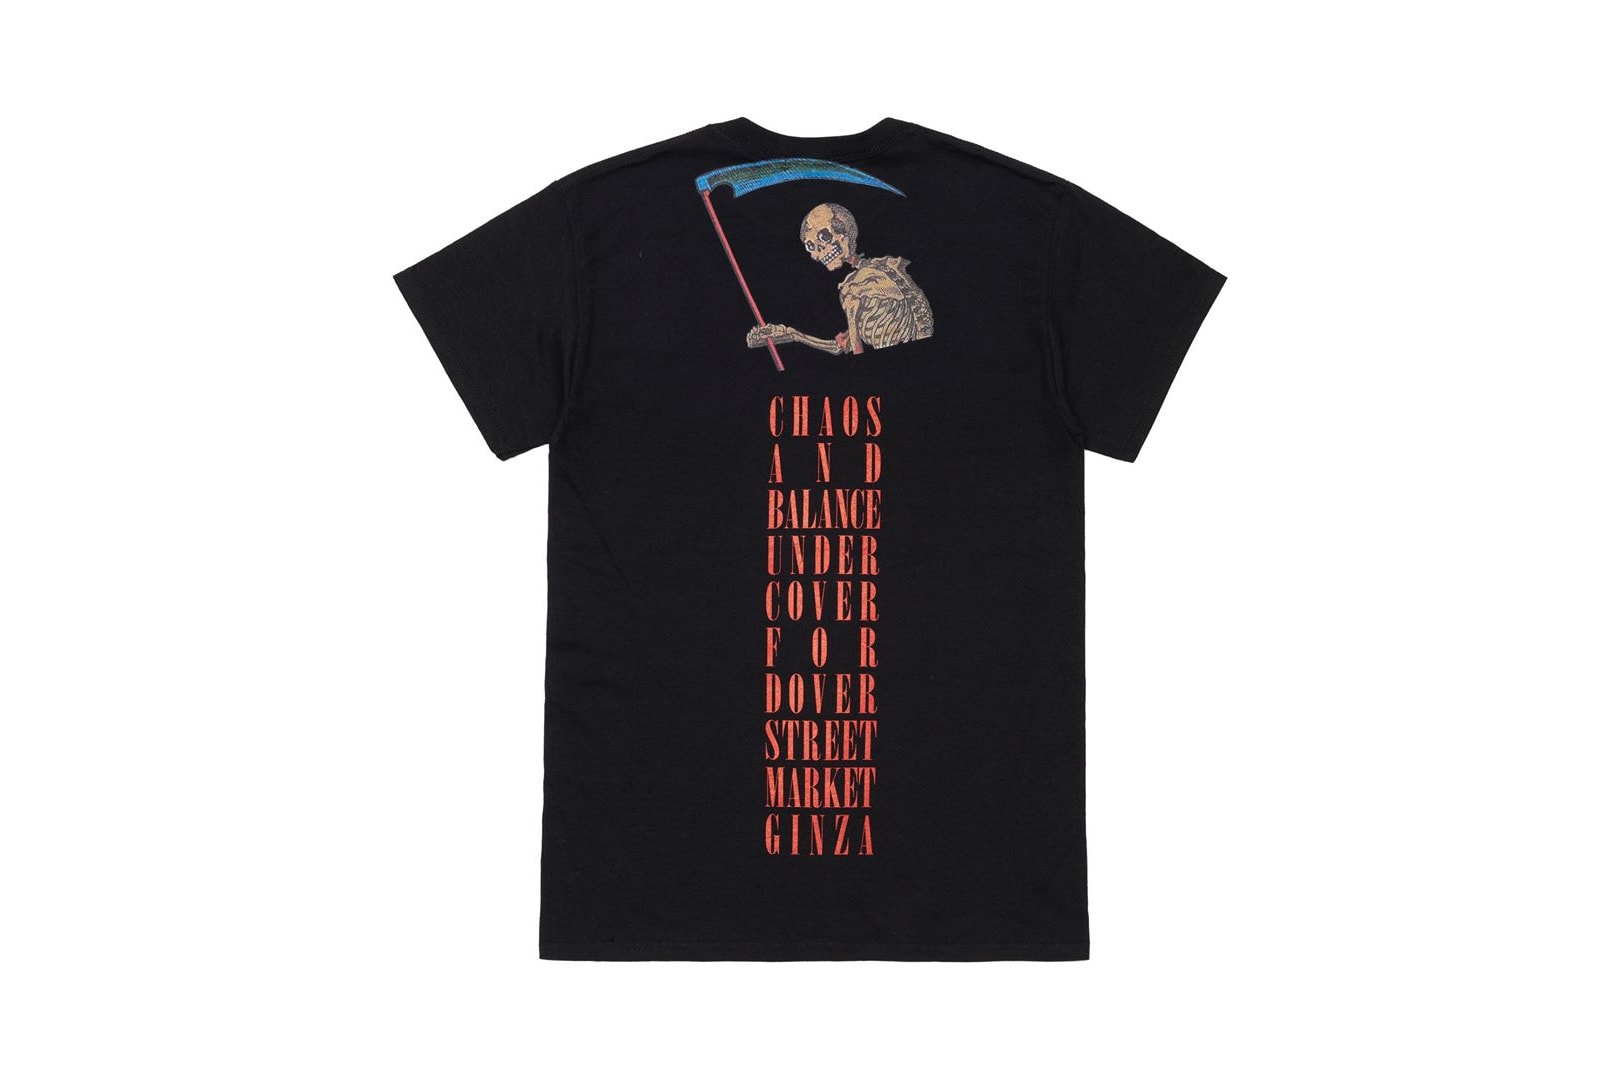 UNDERCOVER Dover Street Market Ginza 5th Anniversary Chaos and Balance Reaper T-Shirt Back